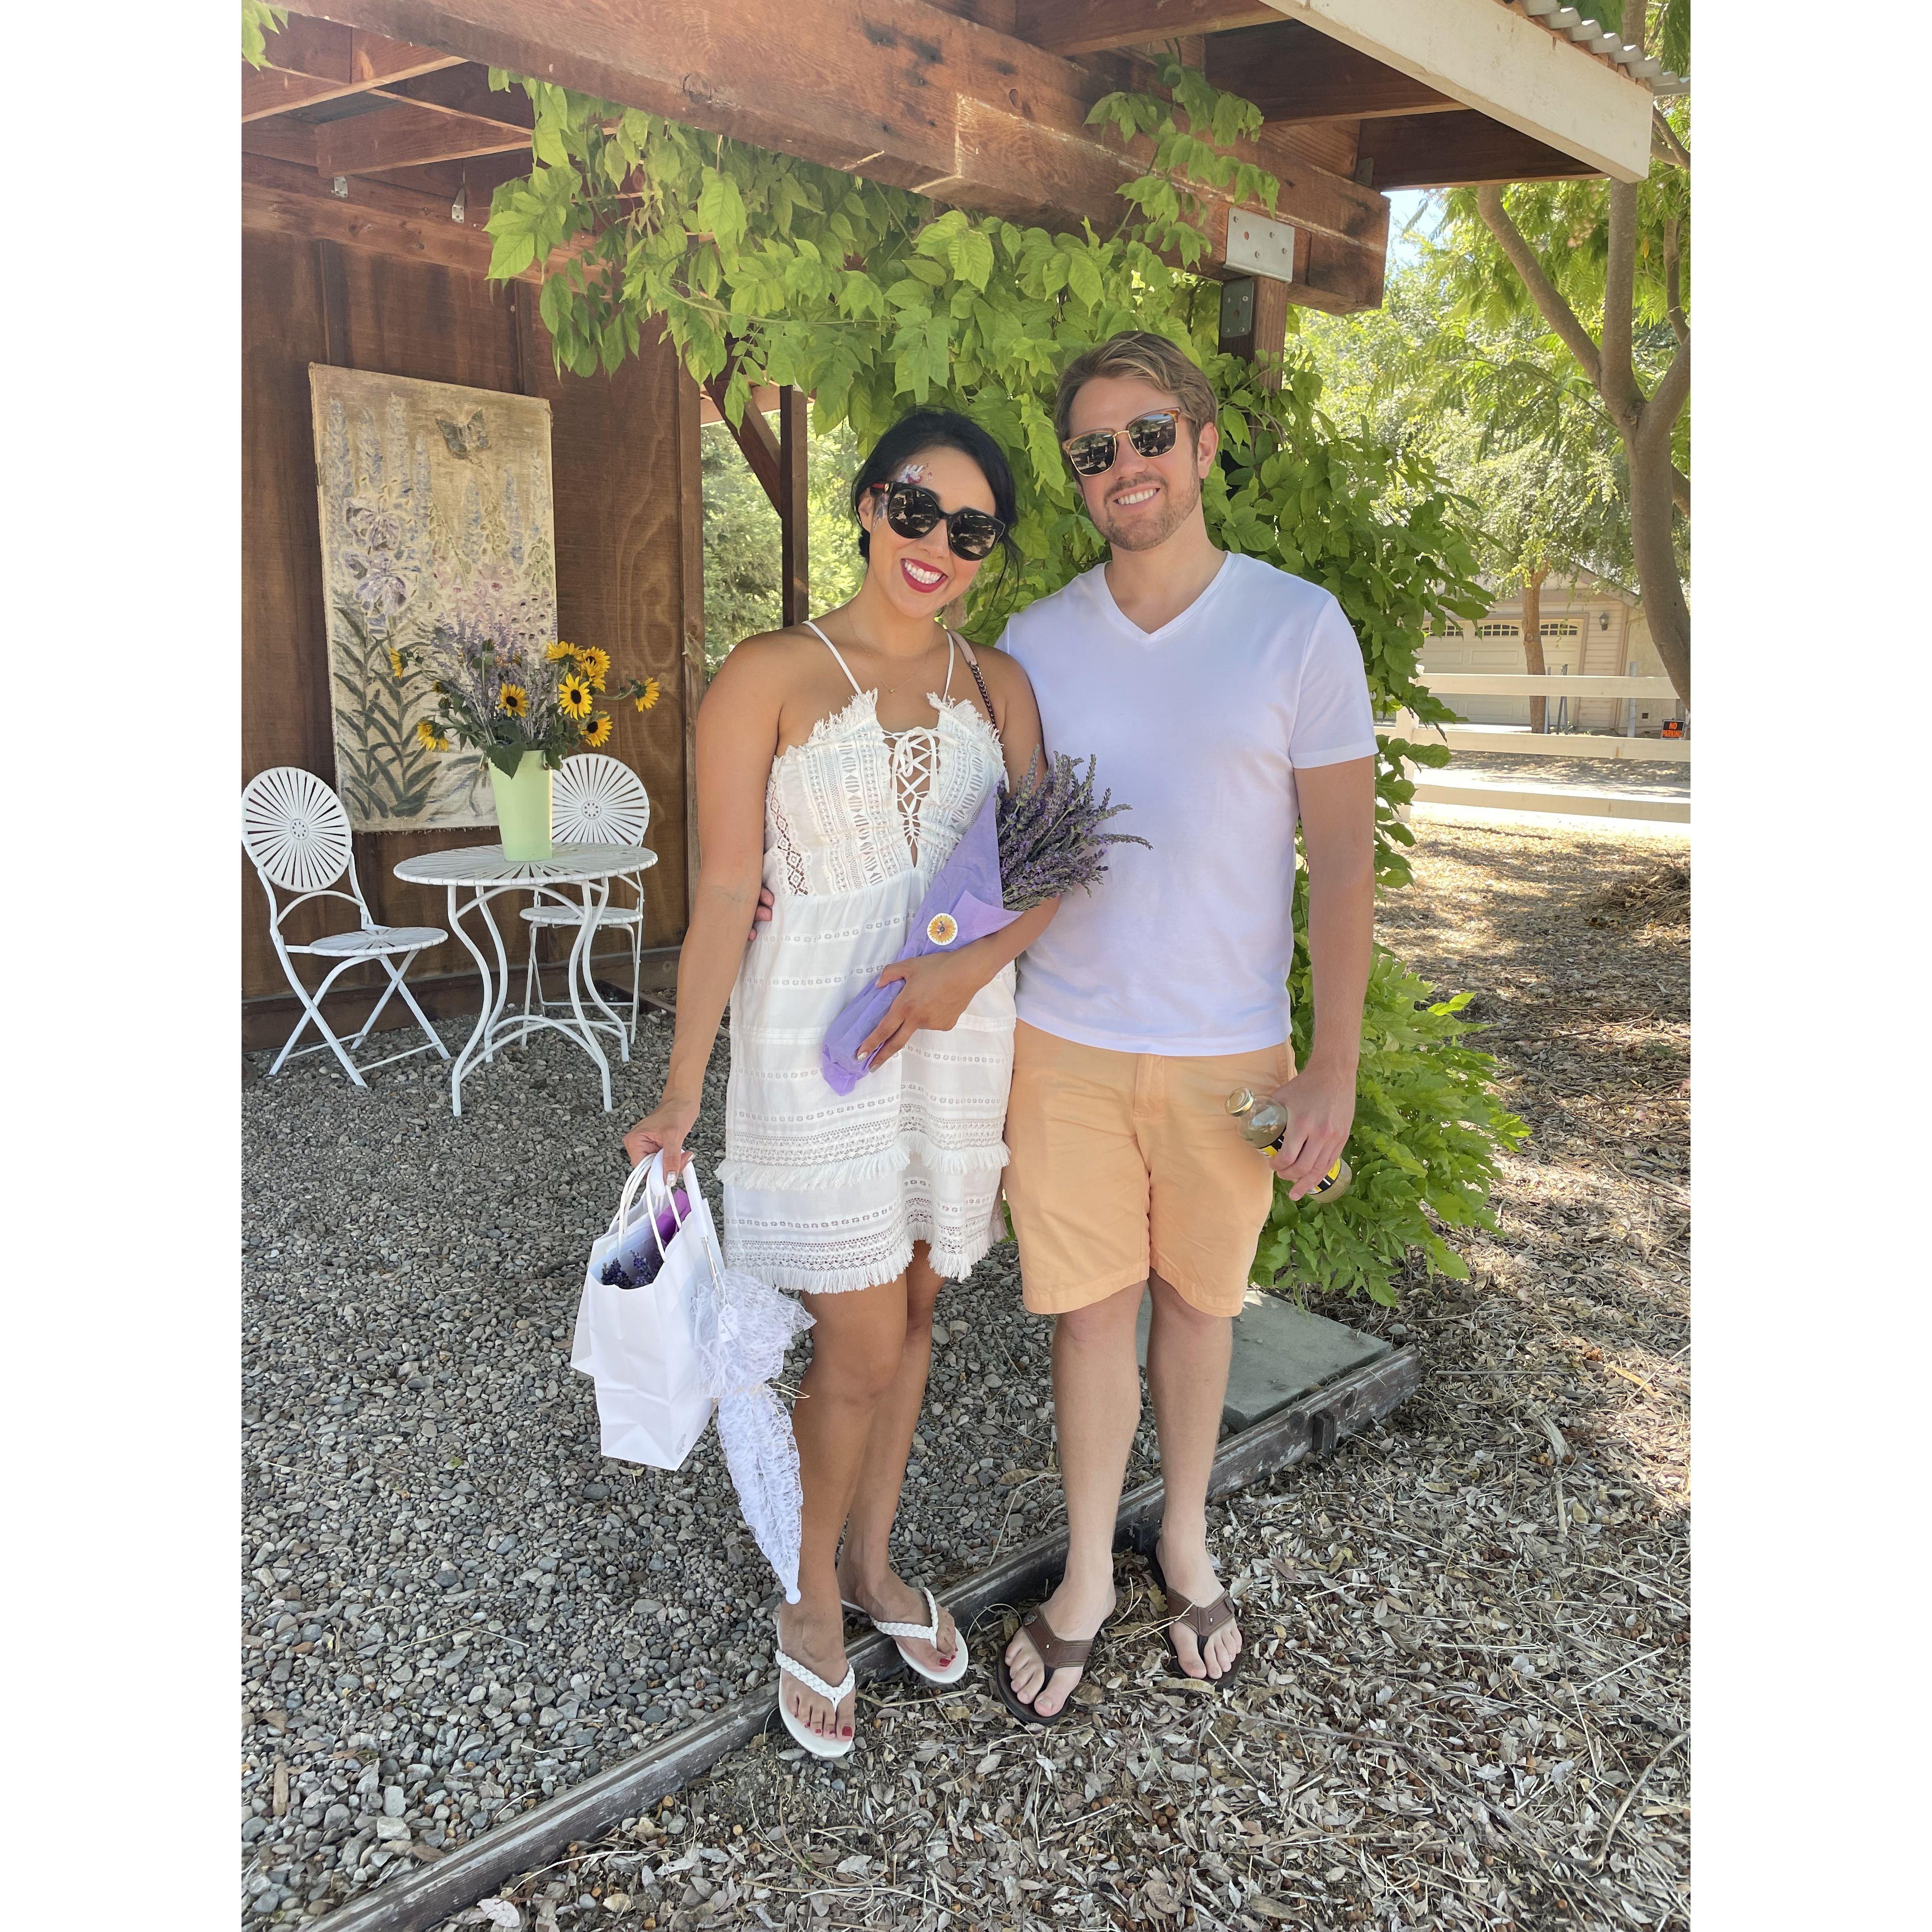 Have kept our tradition of travel for birthday celebrations. This day we visited a lavender farm in Ojai the day before Zach's birthday. July 2021.